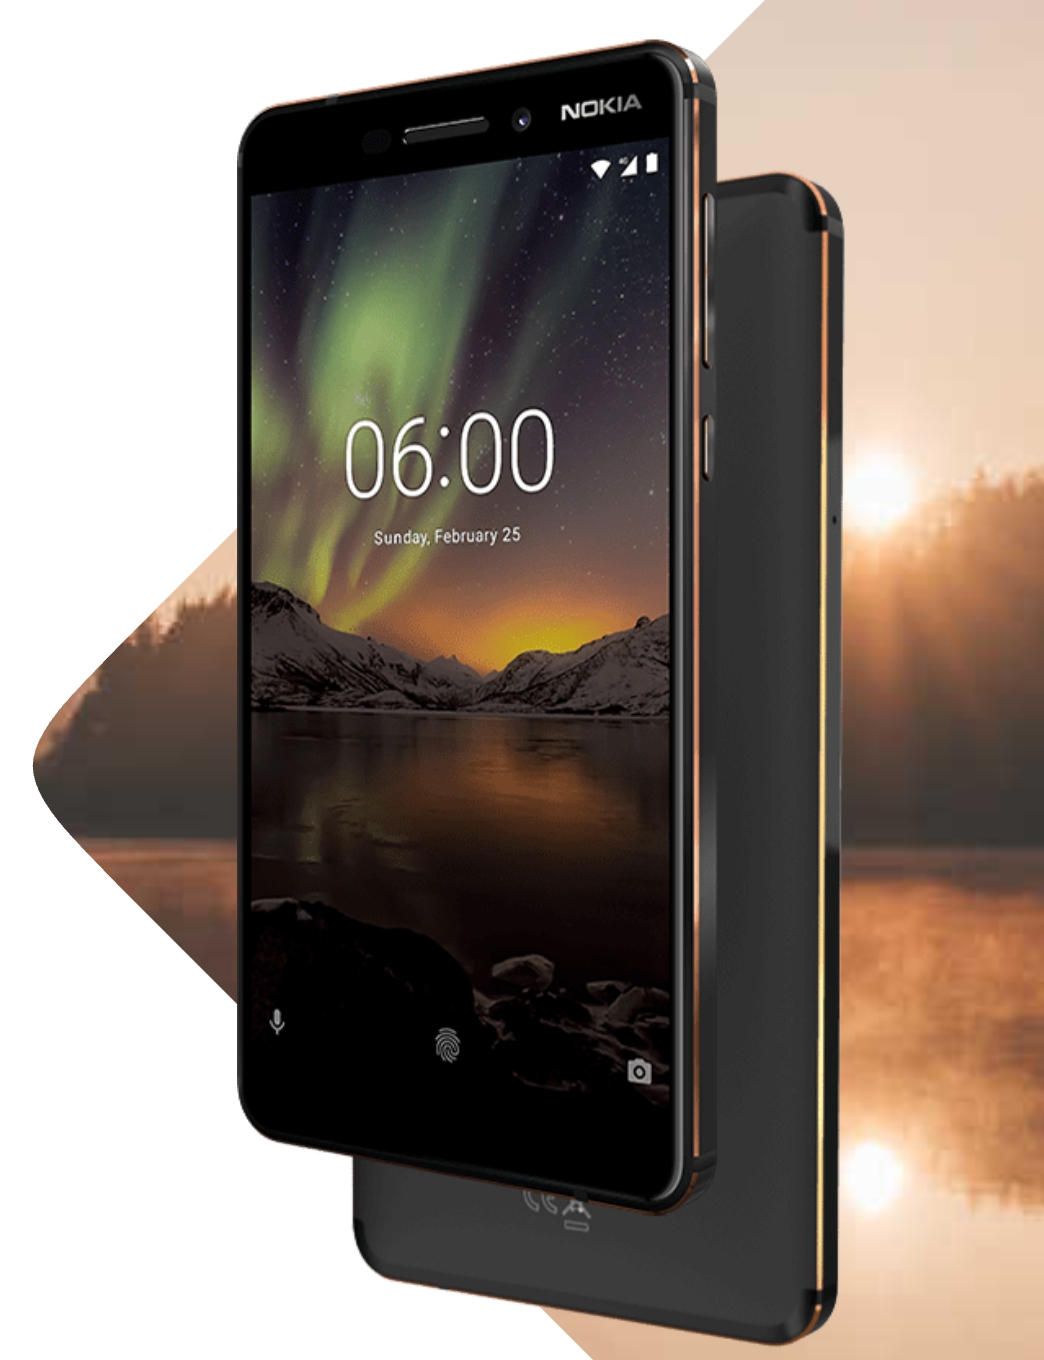 Nokia 6.1 / Nokia 6 (2018) 4GB version launched in India